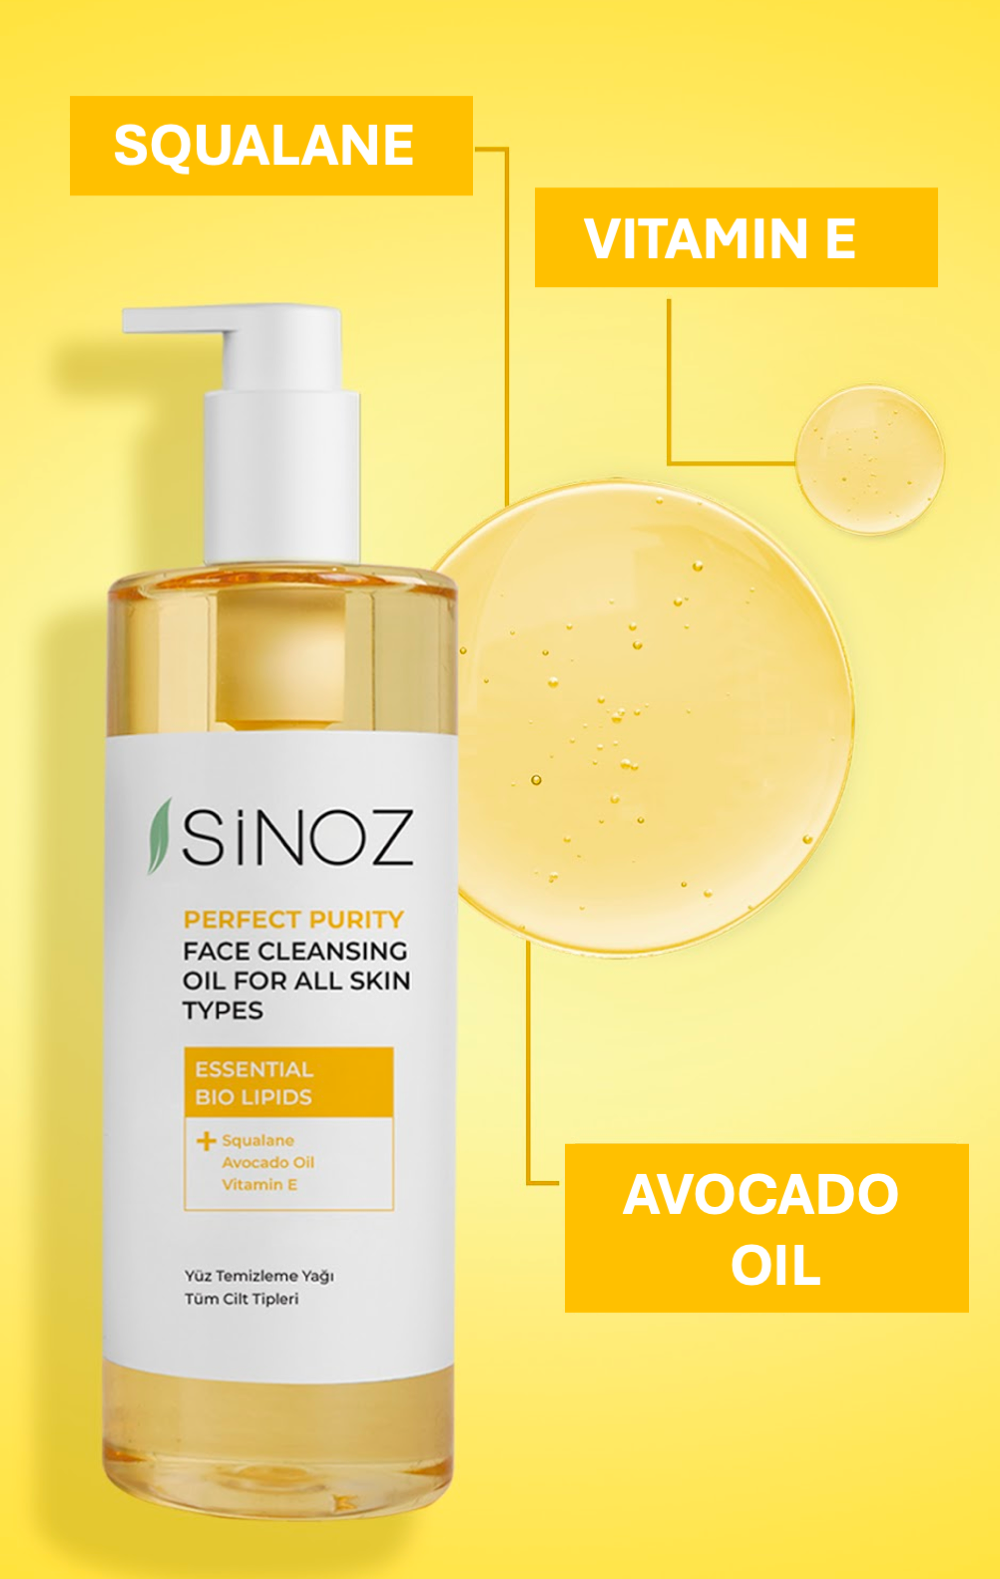 Sinoz Perfect Purity Face Cleansing Oil for All Skin Types